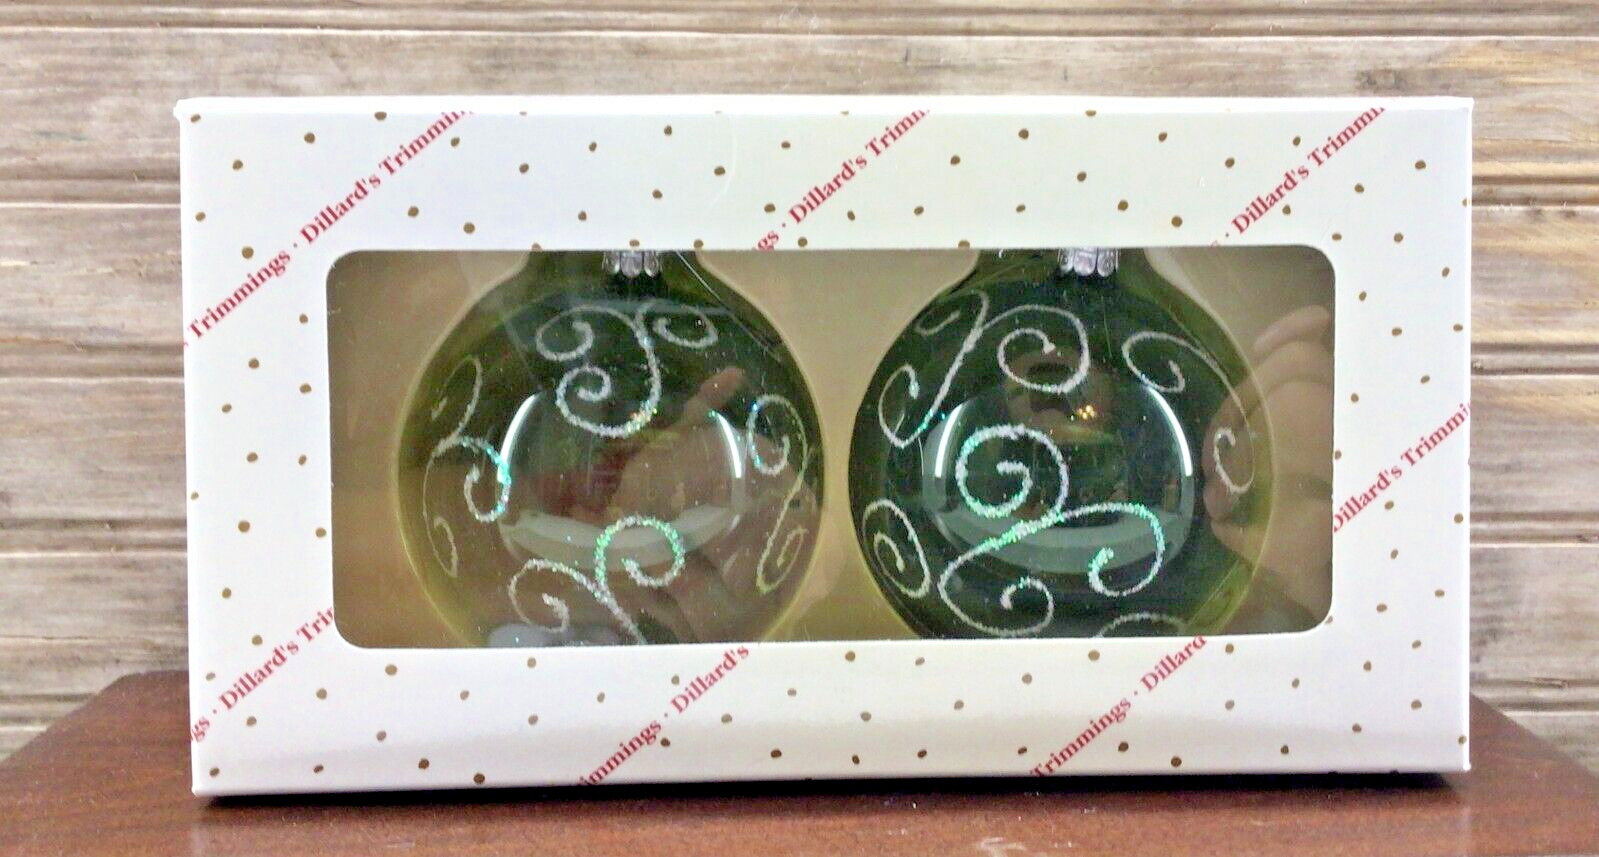 Vintage Dillard's Trimmings Set of 2 Green Glass Glitter Ball Ornaments Boxed#2